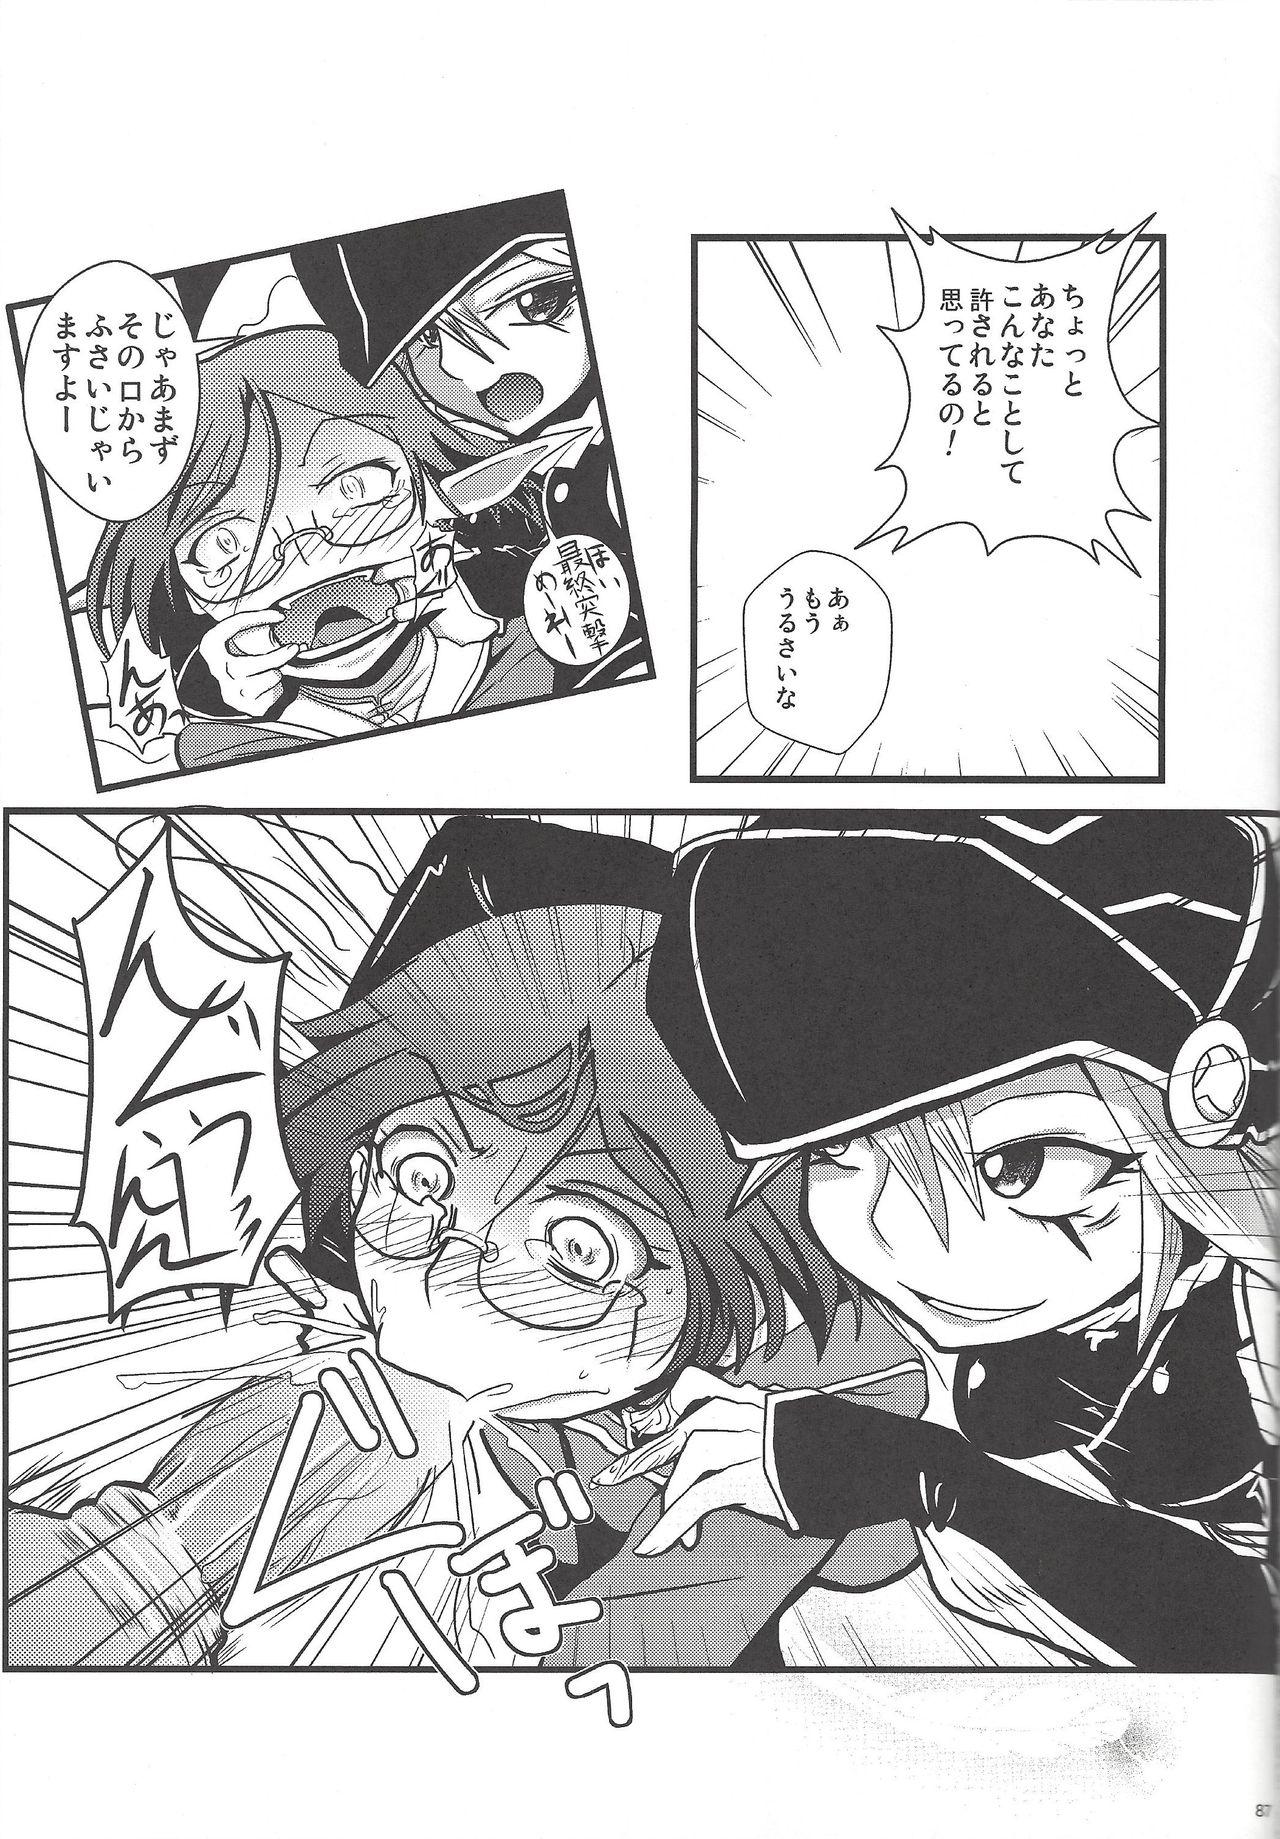 Instant issue Yu ☆ Gi ☆ Oh 55